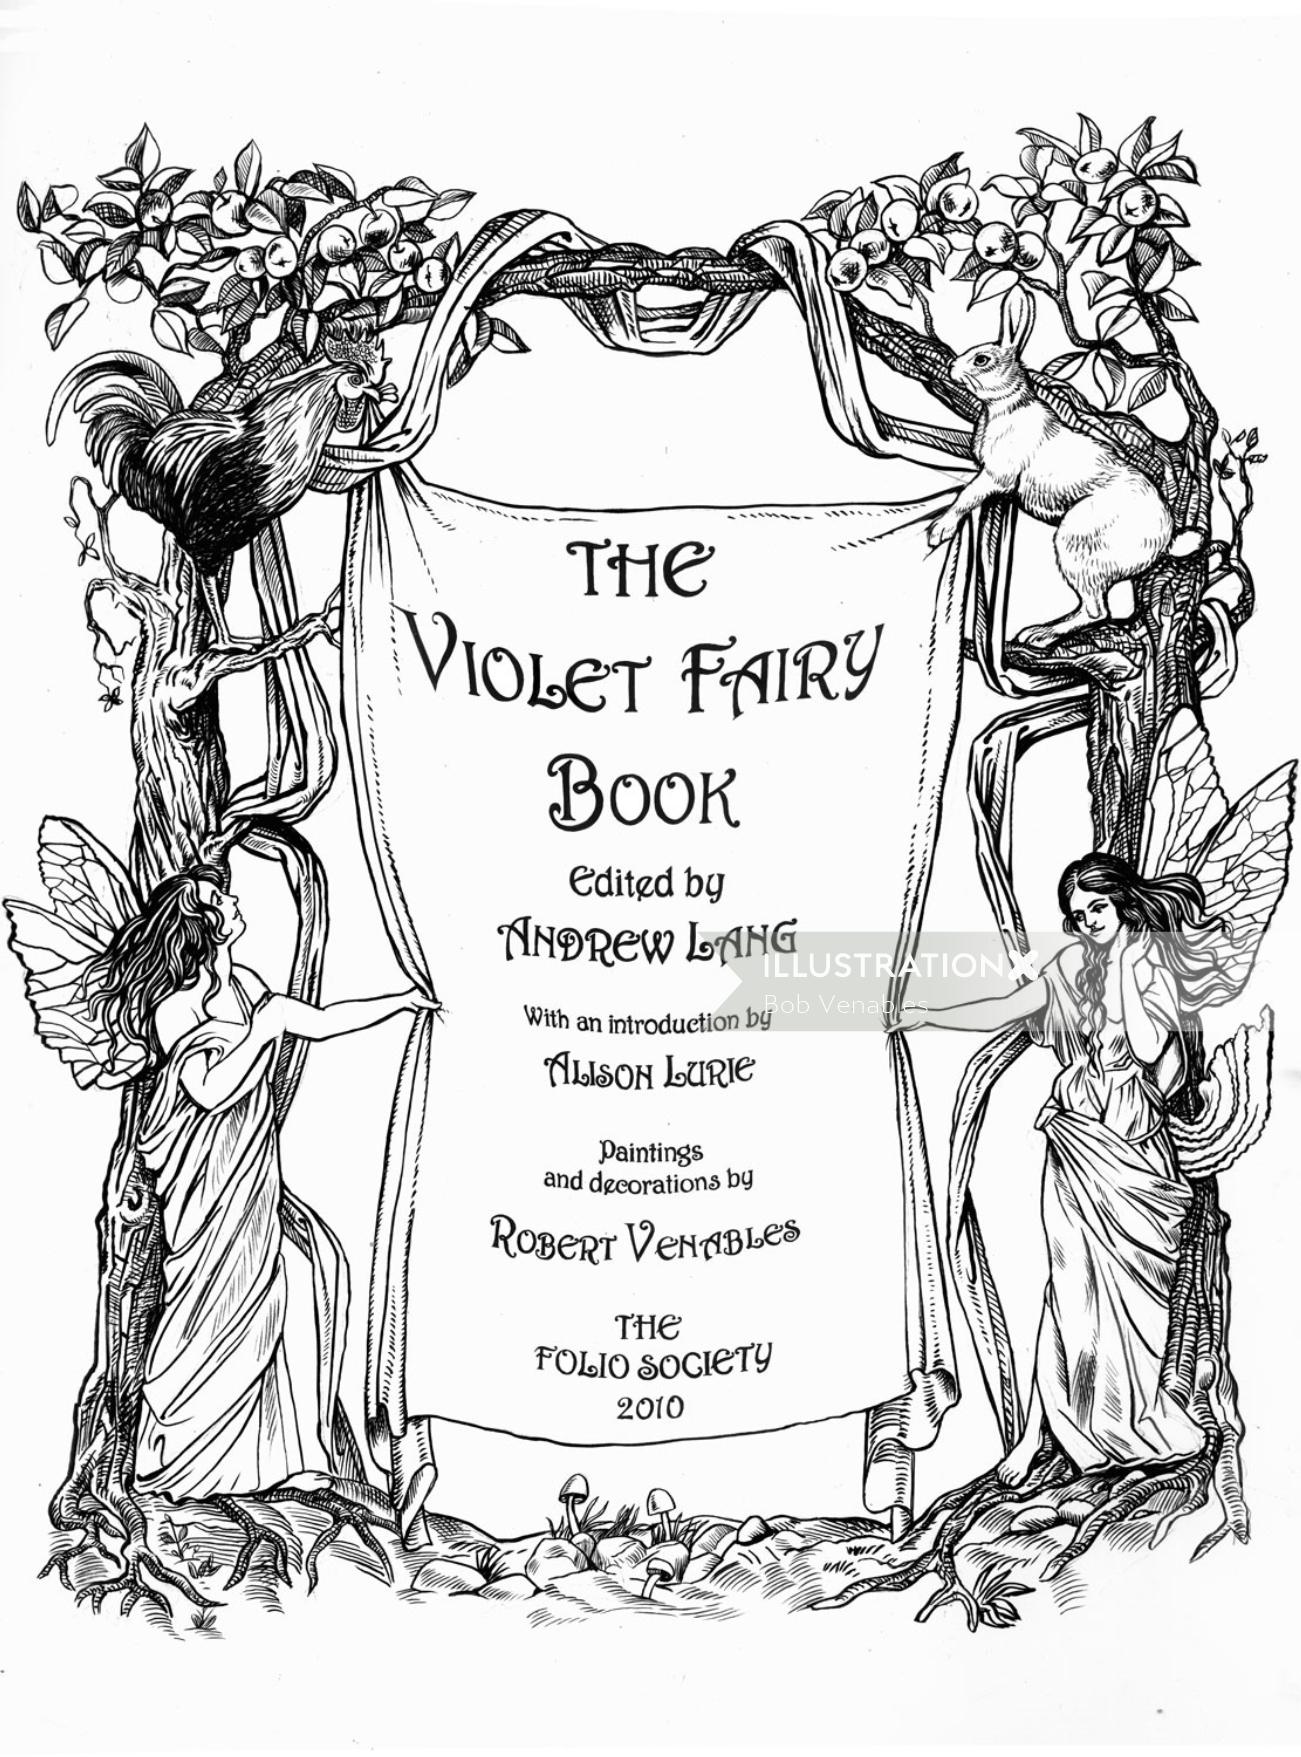 book cover design of The Violet Fairy Book